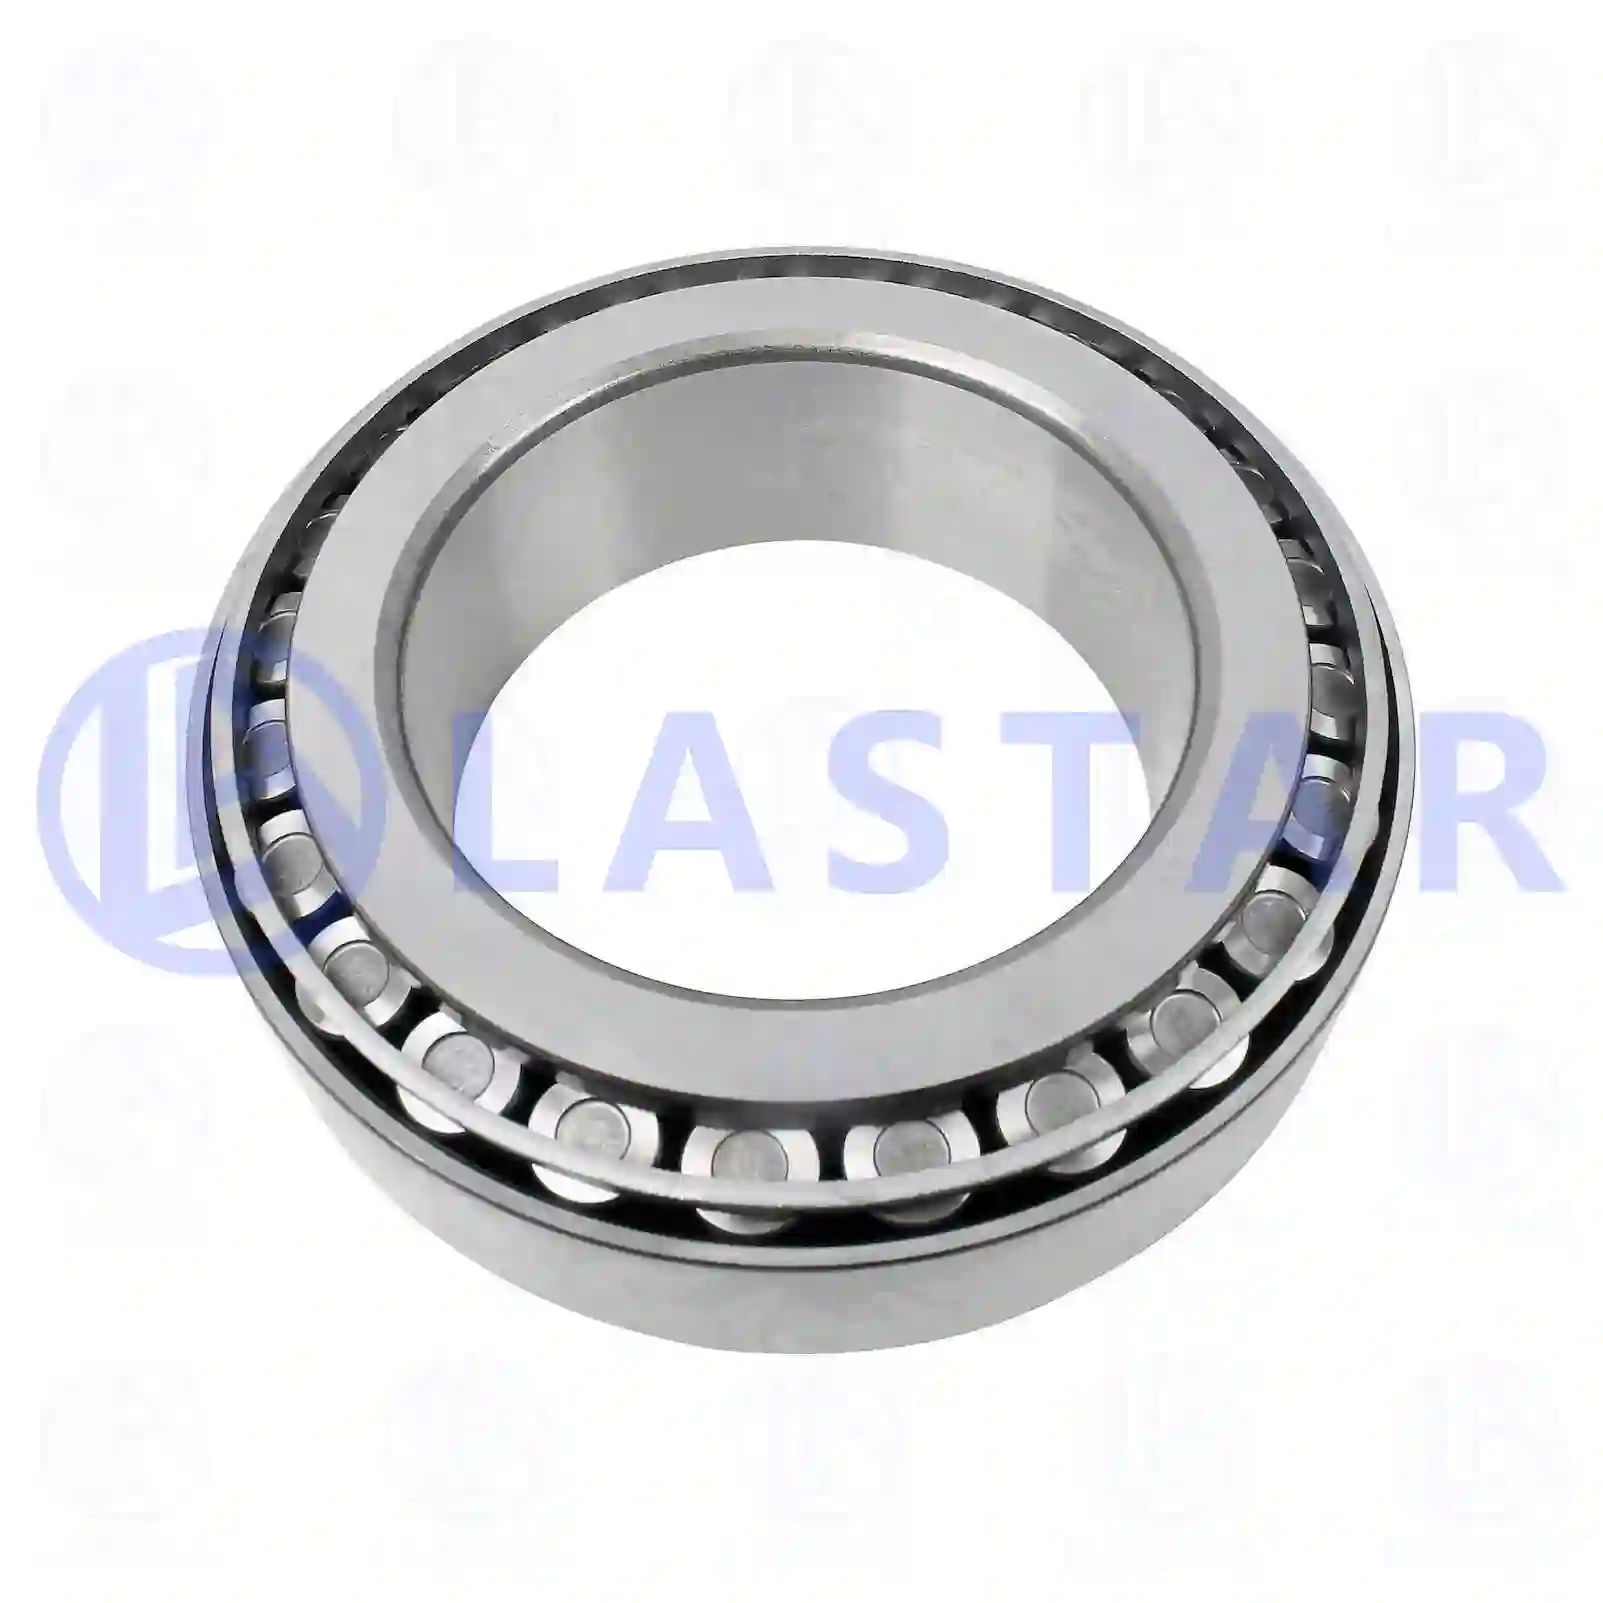 Hub Tapered roller bearing, la no: 77726356 ,  oem no:0159814705, 0159814805, , Lastar Spare Part | Truck Spare Parts, Auotomotive Spare Parts